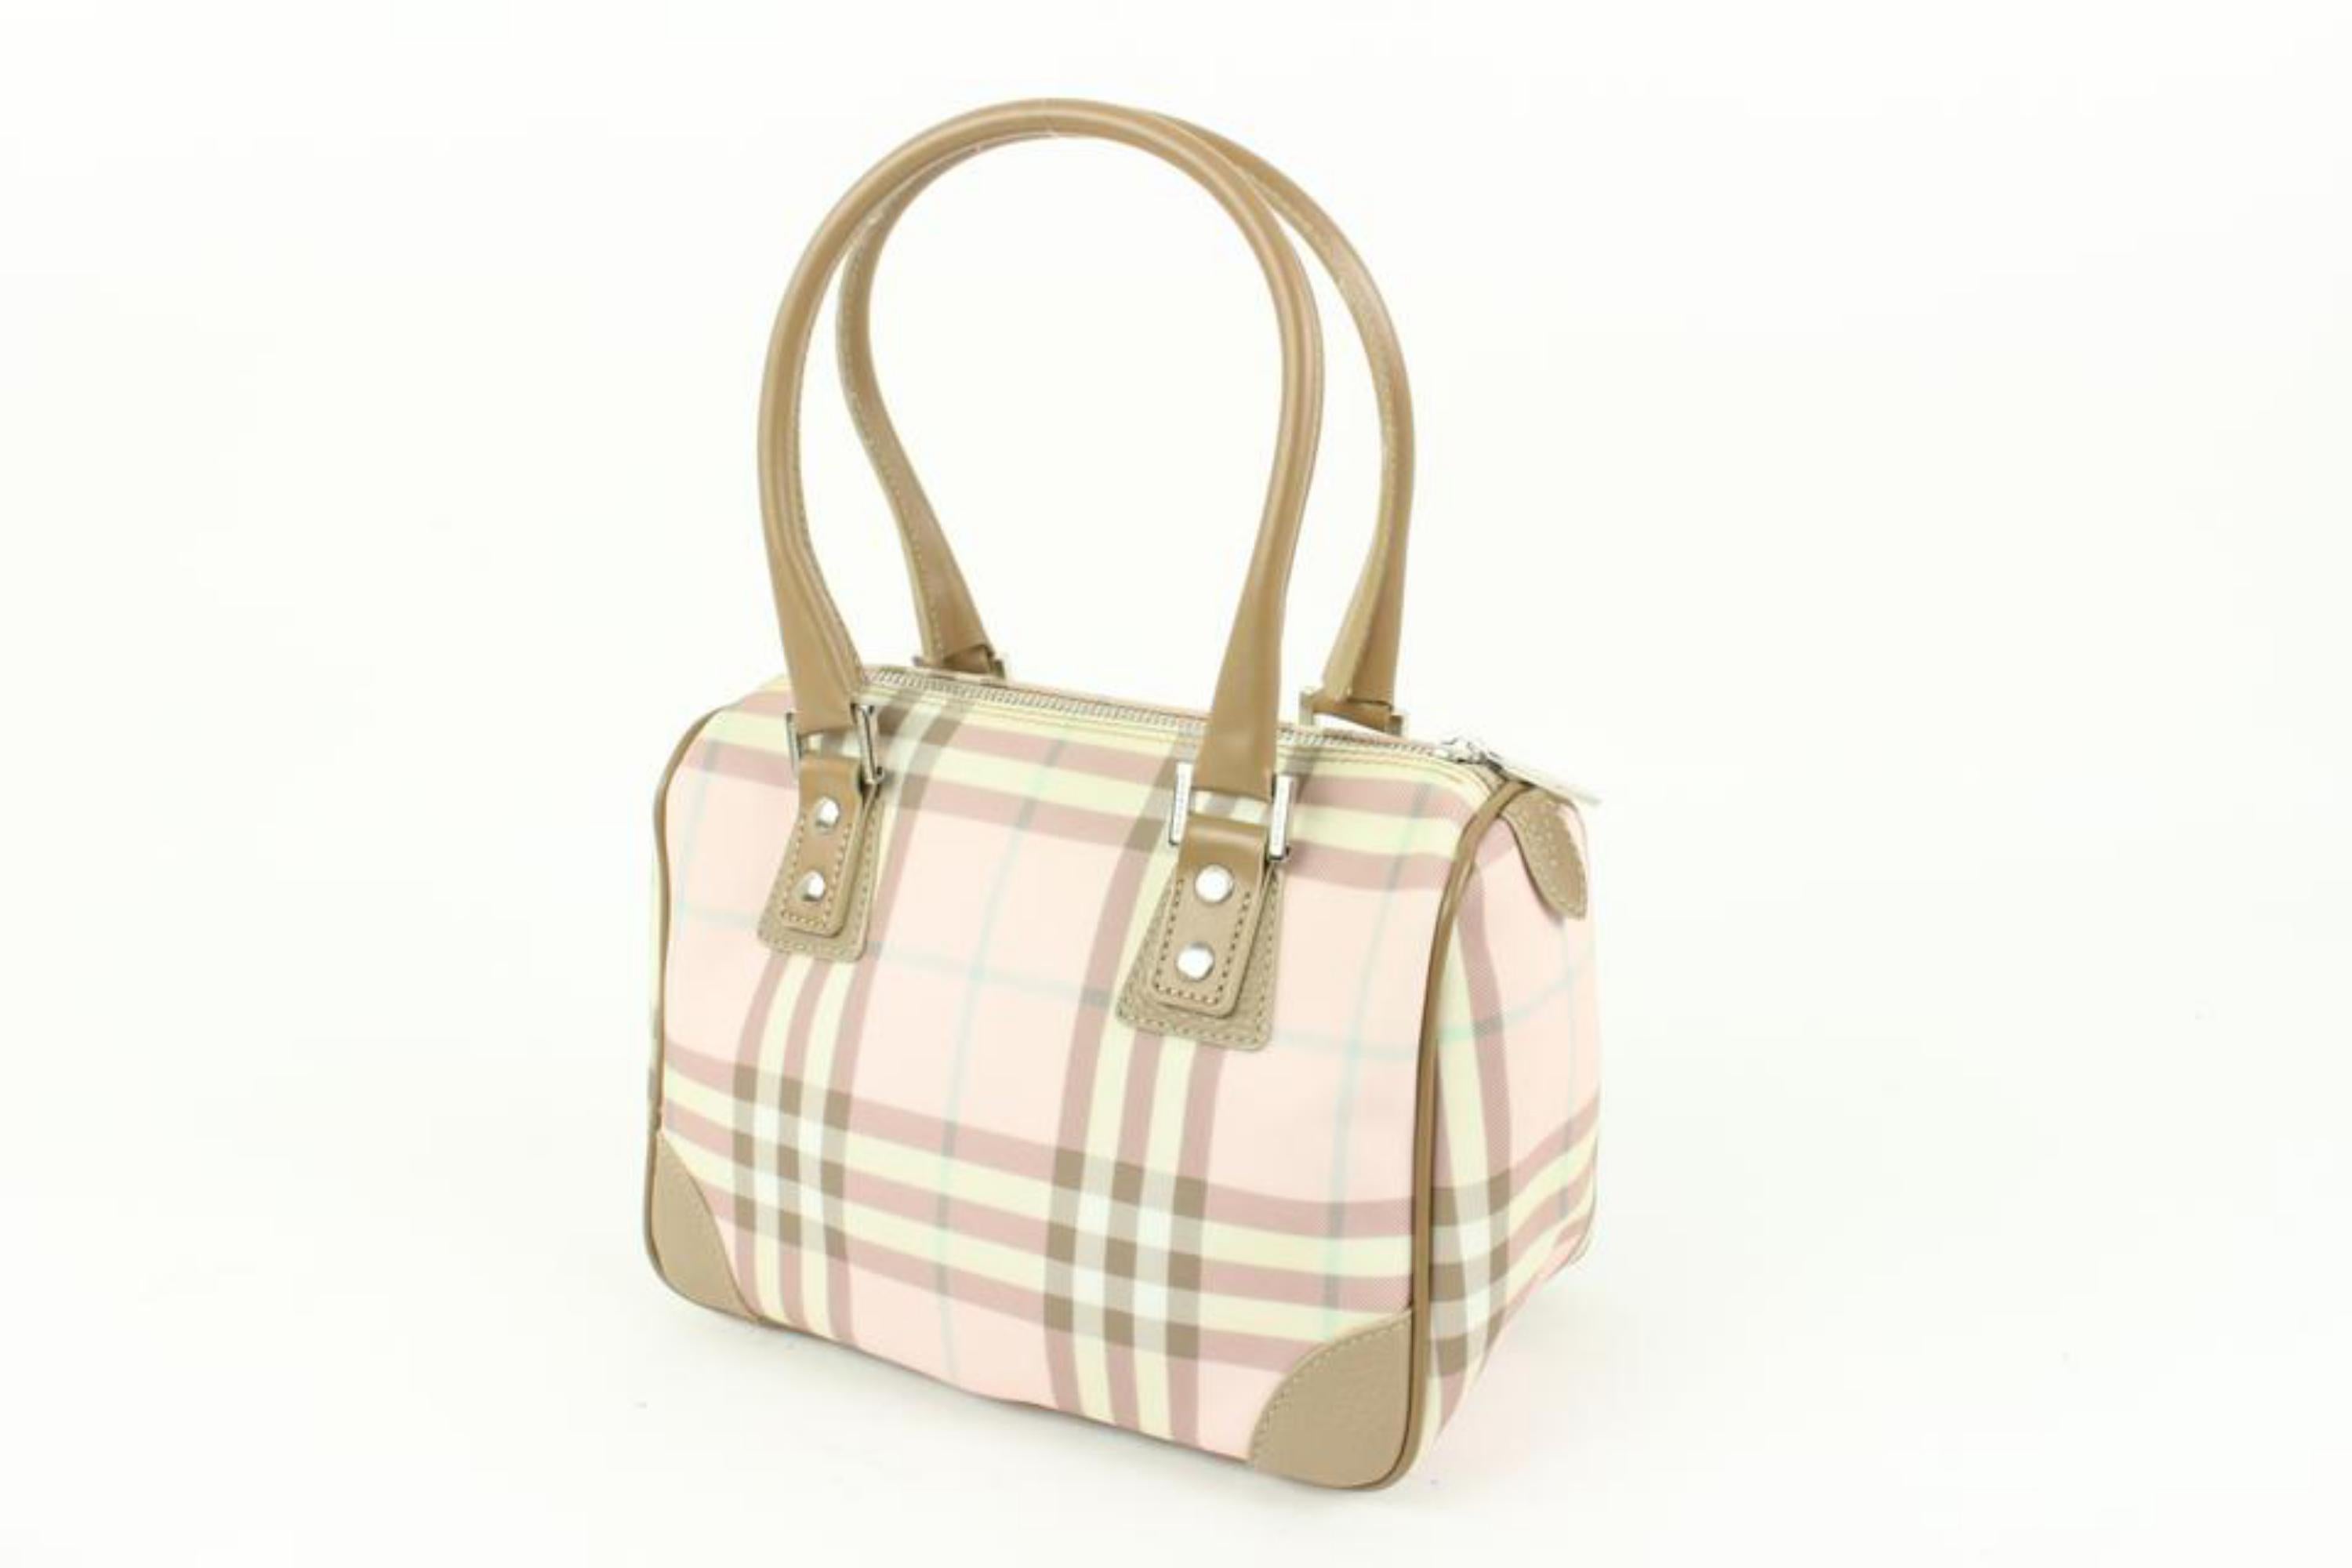 Burberry London Rare Nova Pink Cotton Candy Check Satchel Bag 54b414s
Date Code/Serial Number: S 04 1
Made In: Italy
Measurements: Length:  9